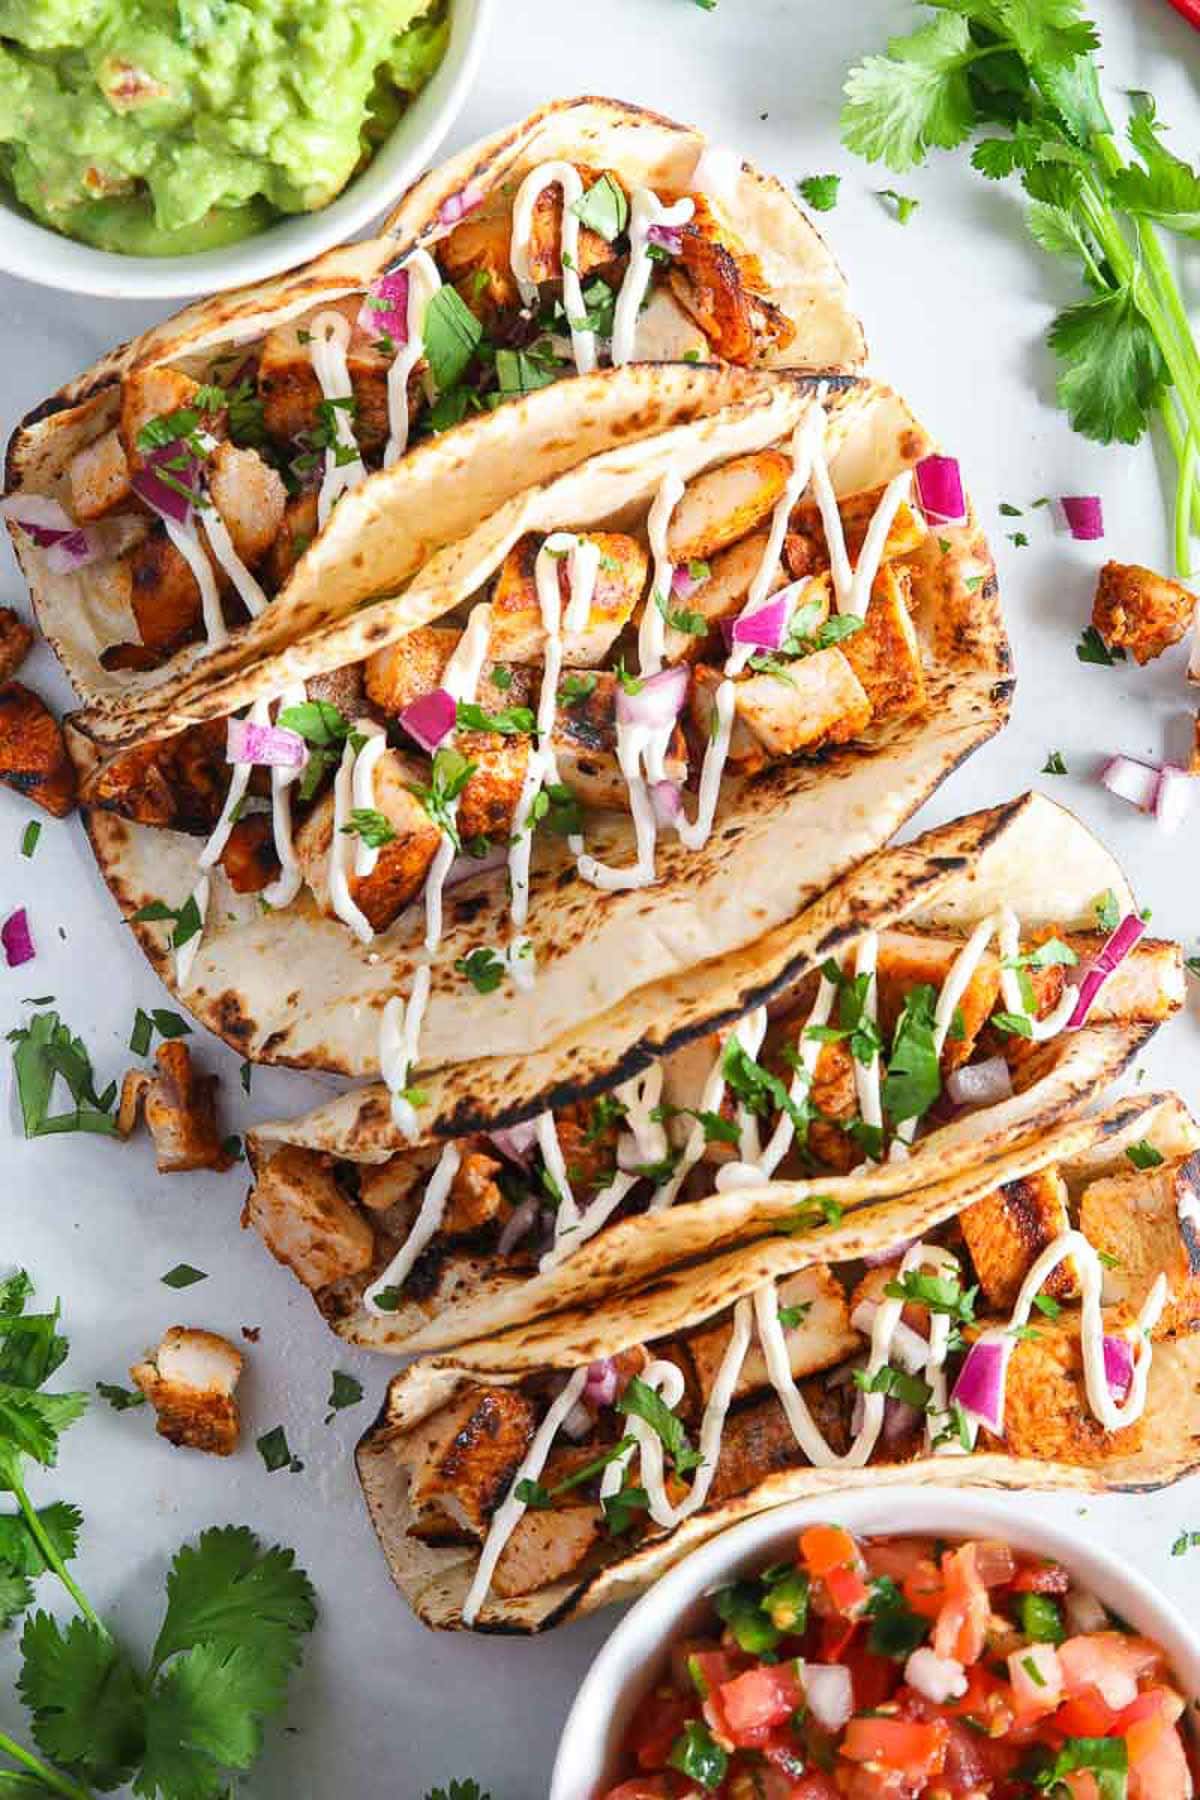 Grilled chicken street tacos on a plate garnished with cilantro, red onion and white sauce.